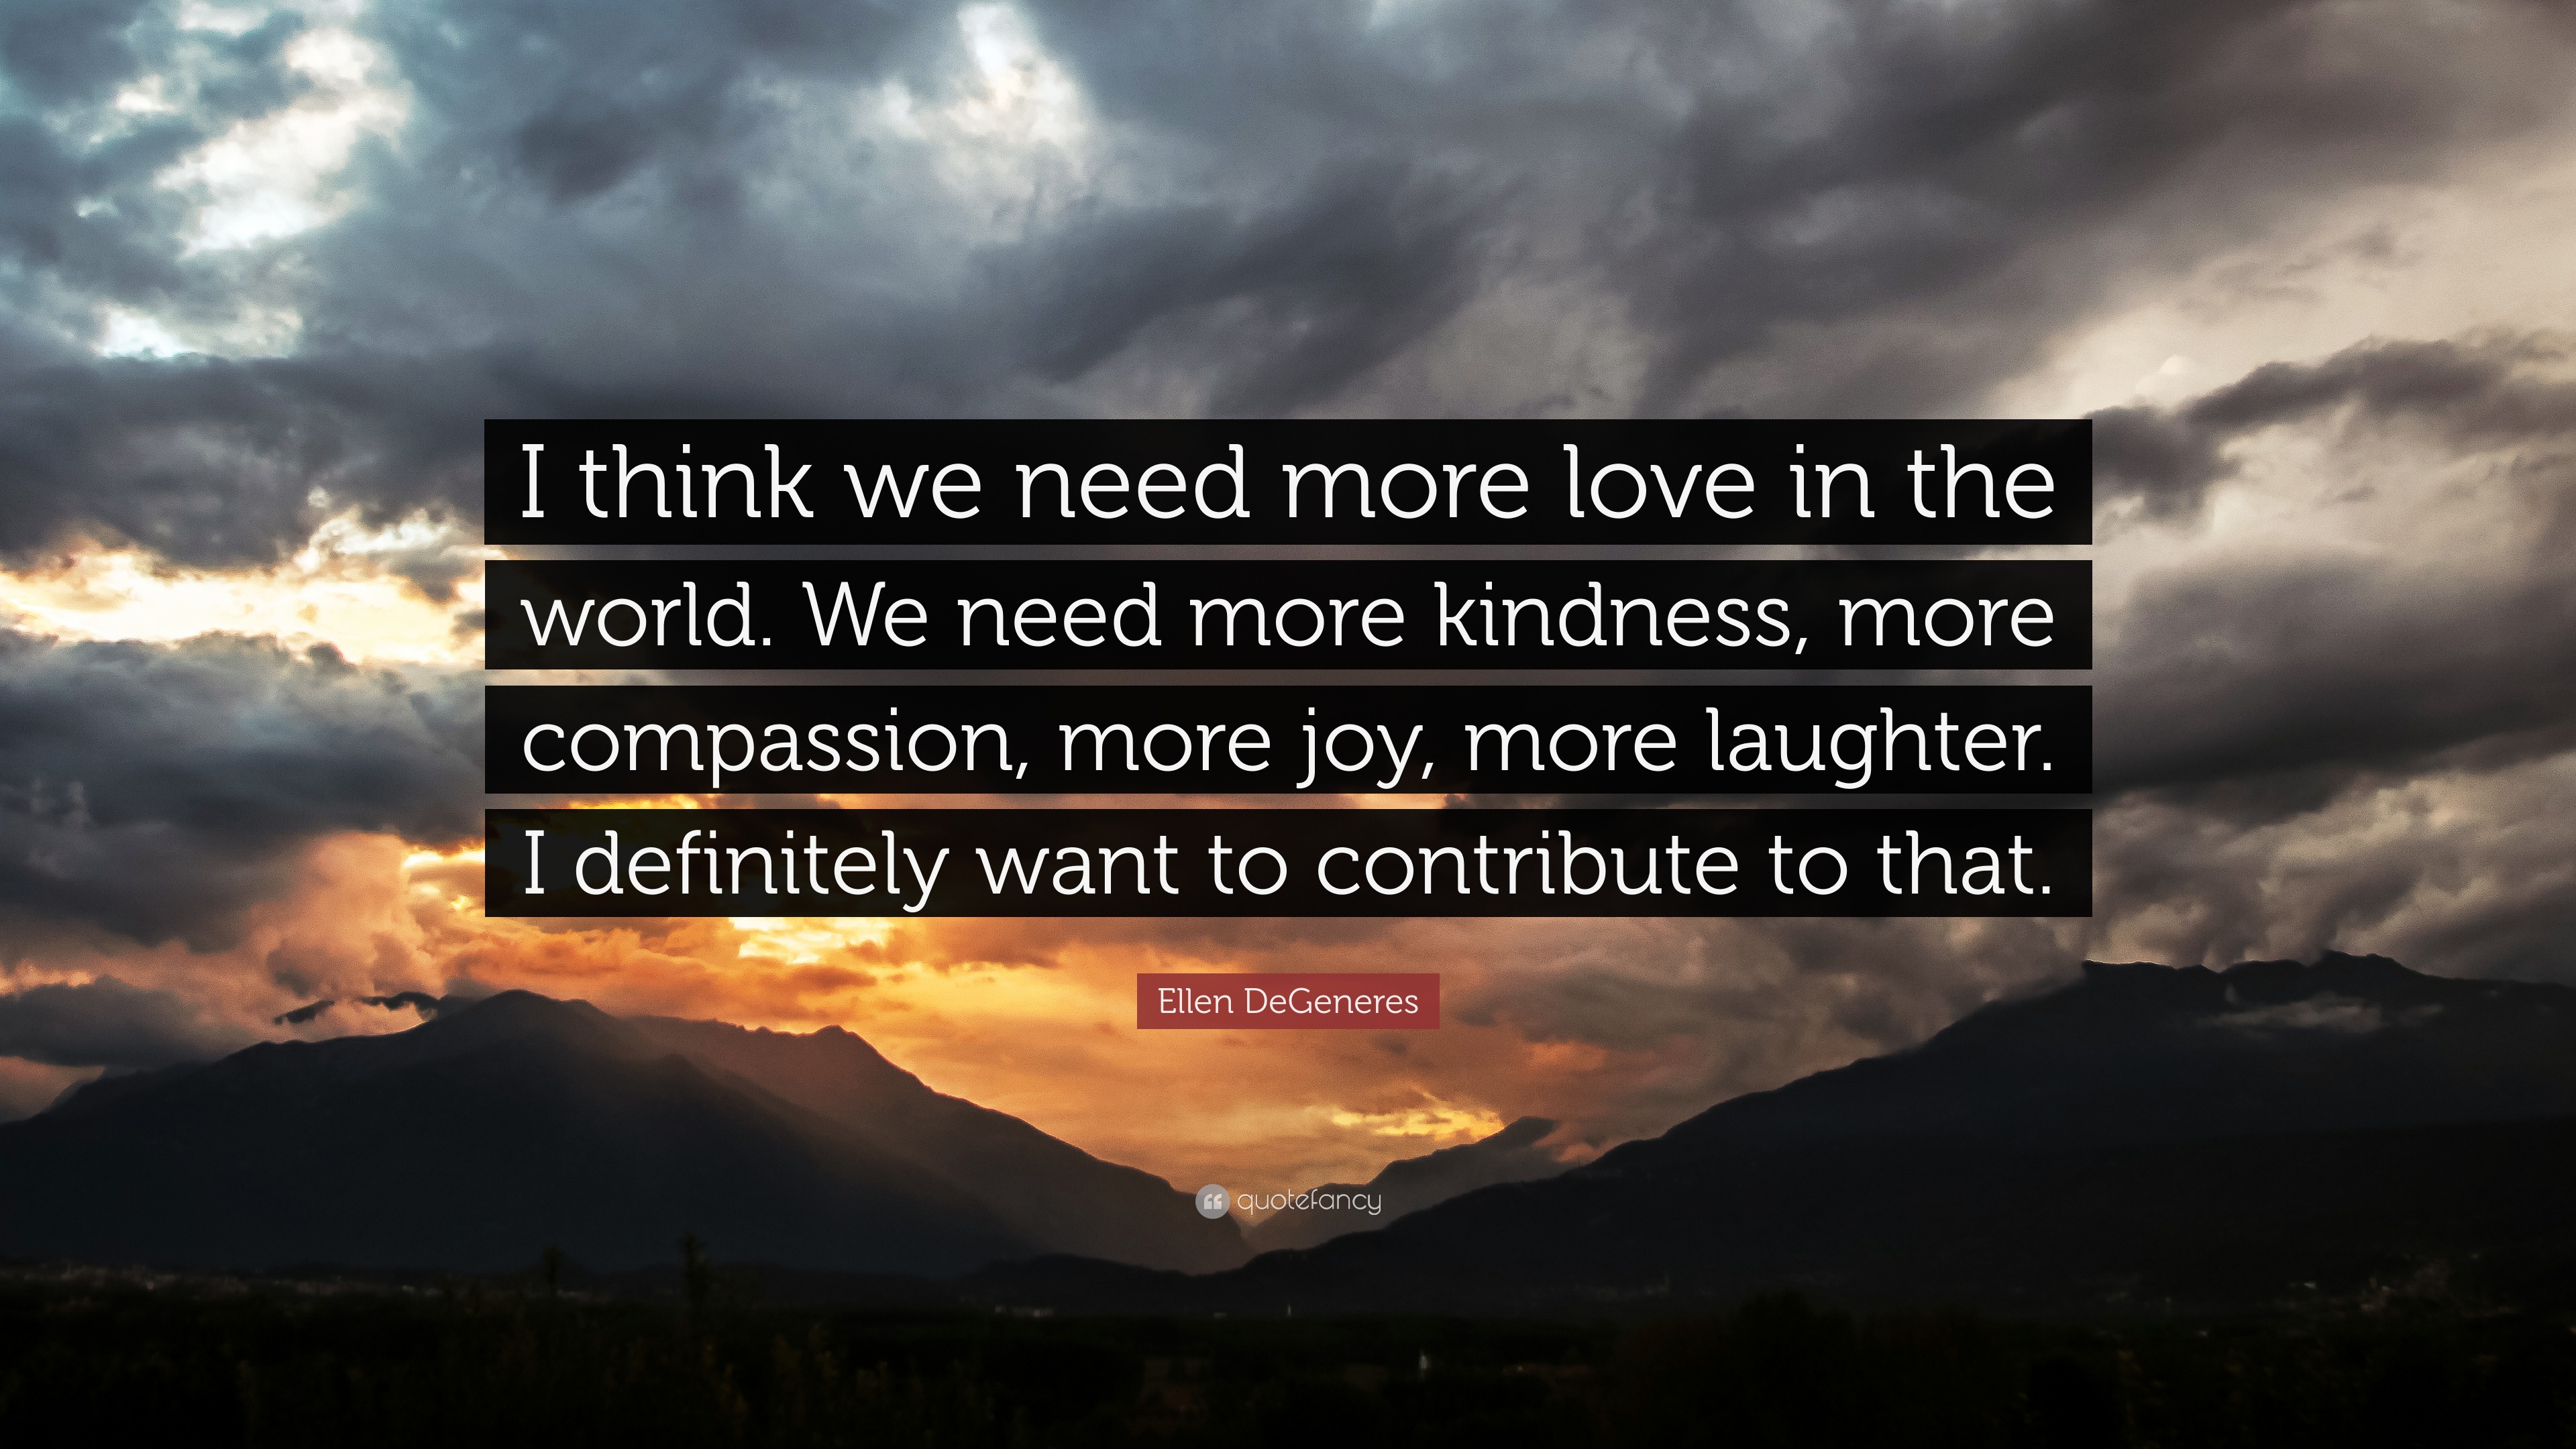 Ellen DeGeneres Quote: “I think we need more love in the world. We need  more kindness, more compassion, more joy, more laughter. I definitely wa”